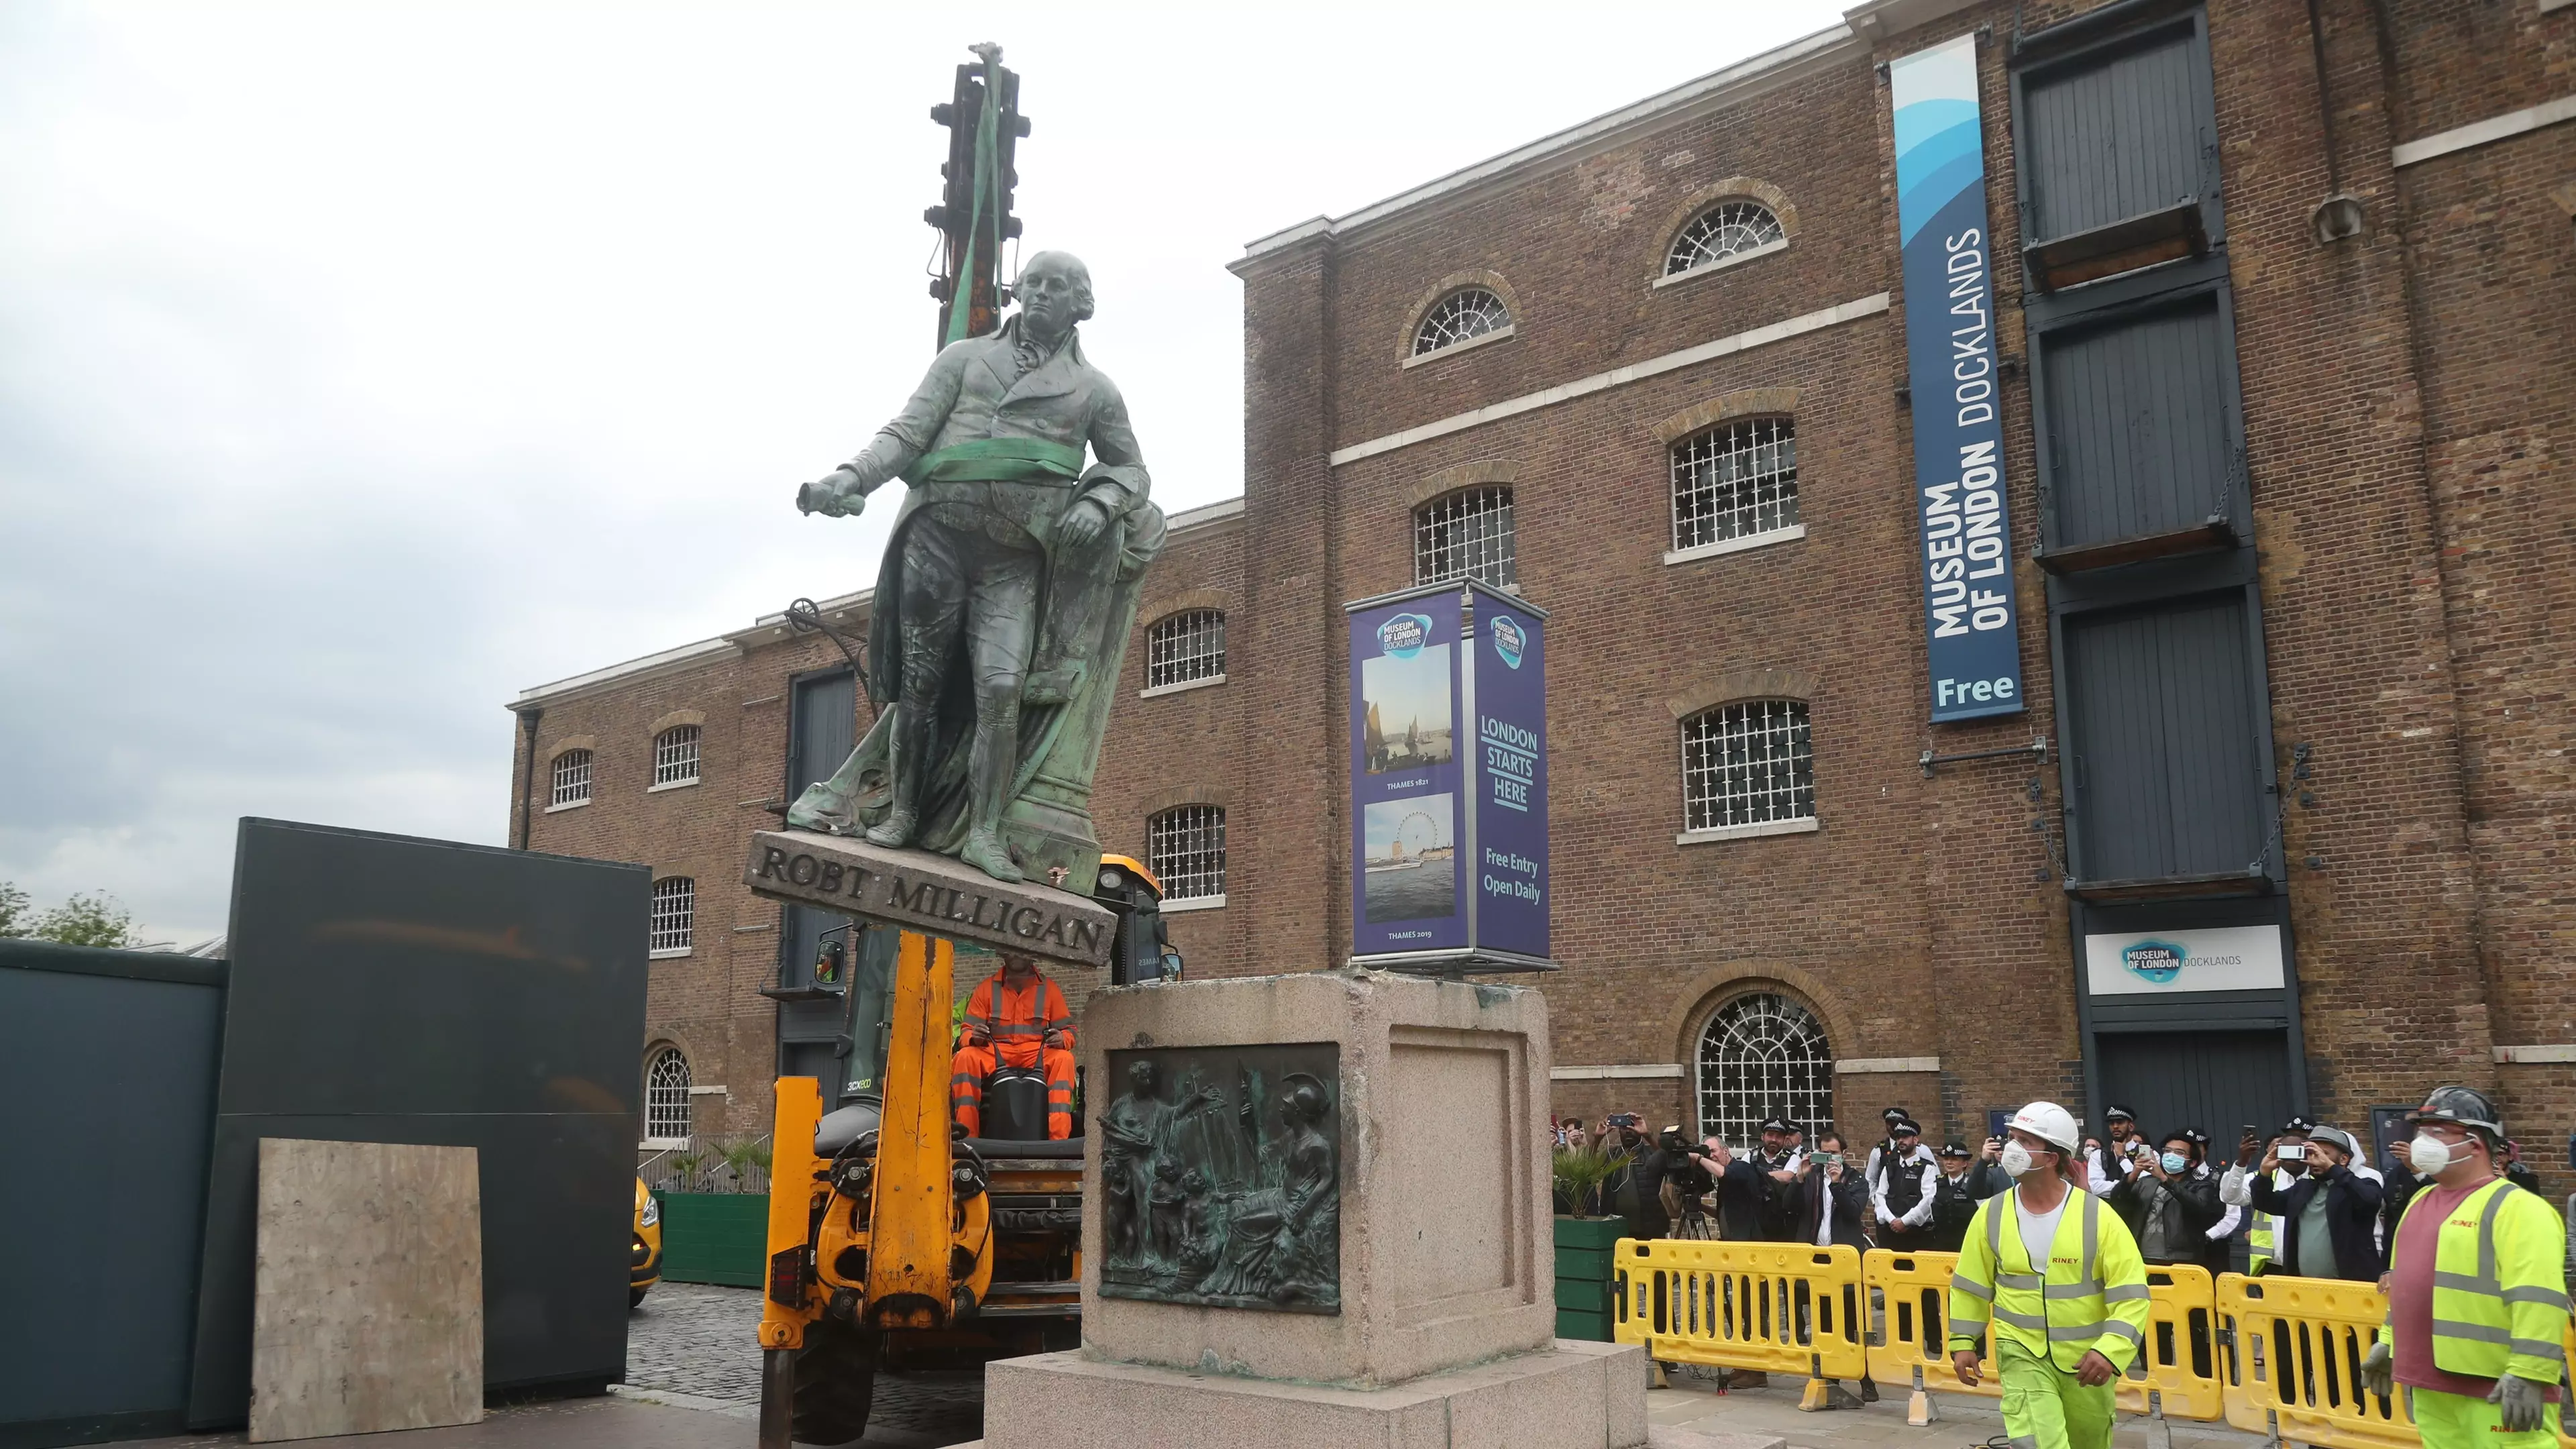 Statue Of Slave Owner Robert Milligan Removed From West India Quay